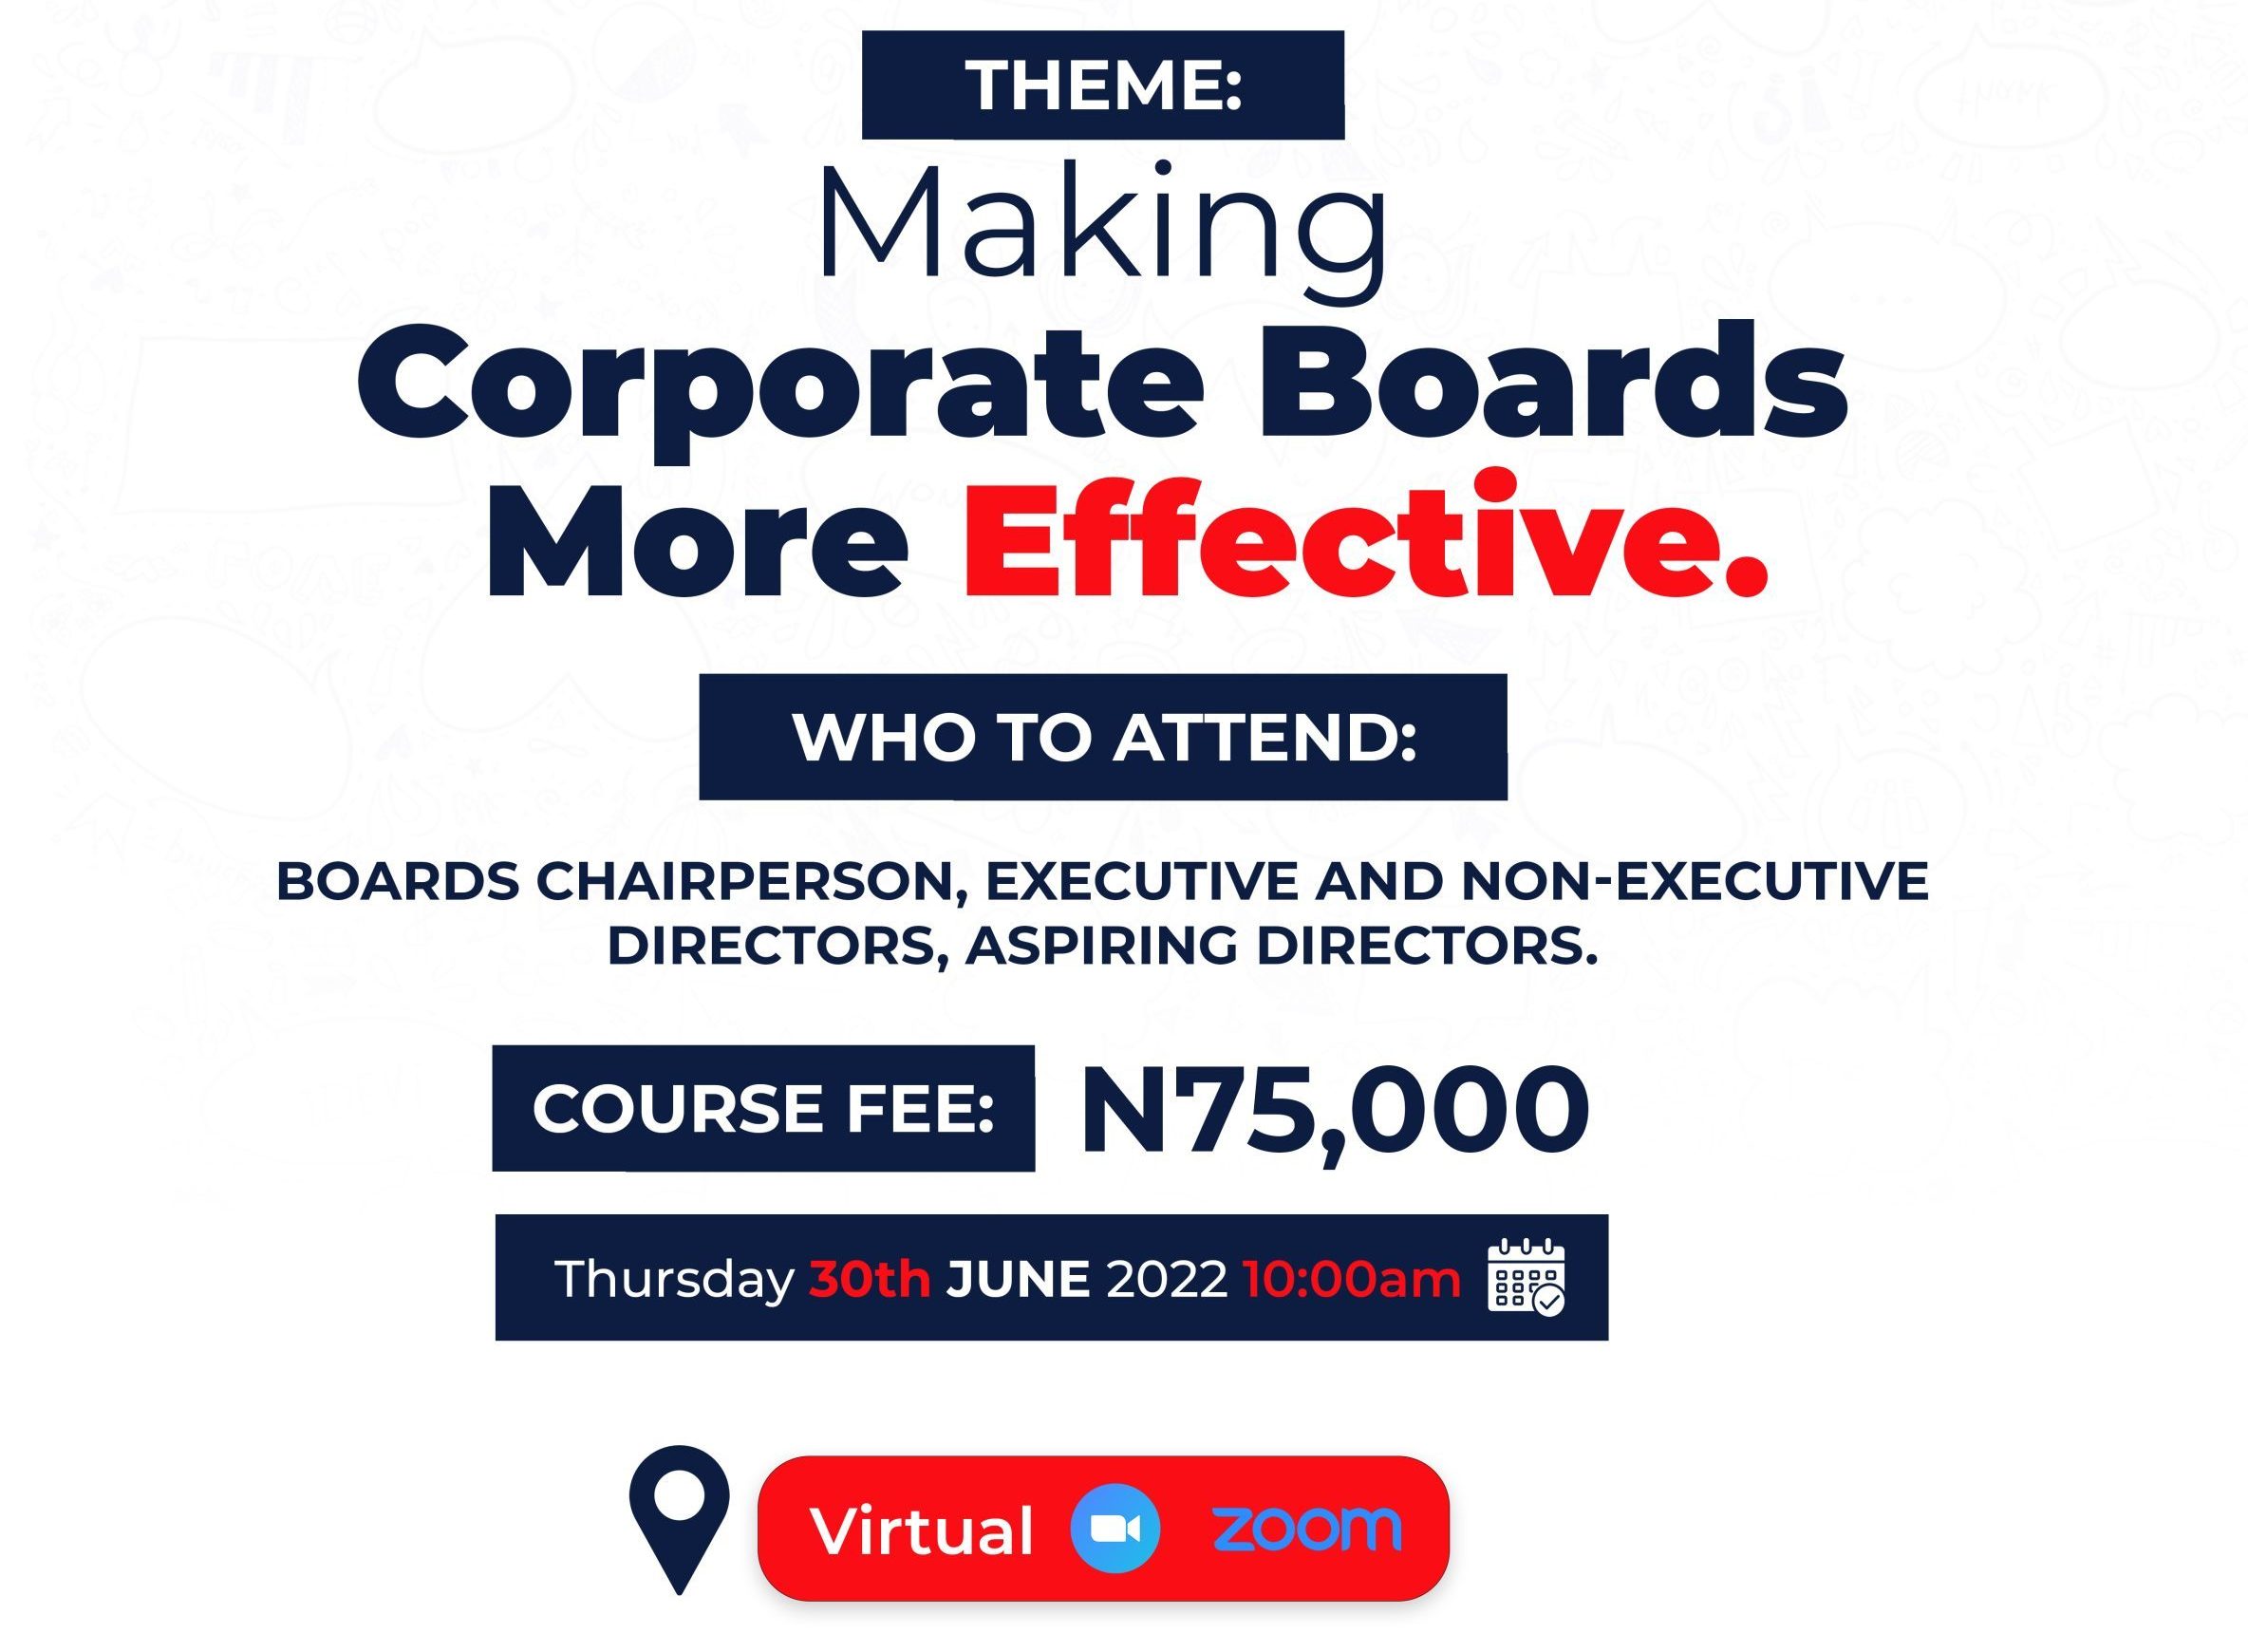 Making Corporate Boards More Effective